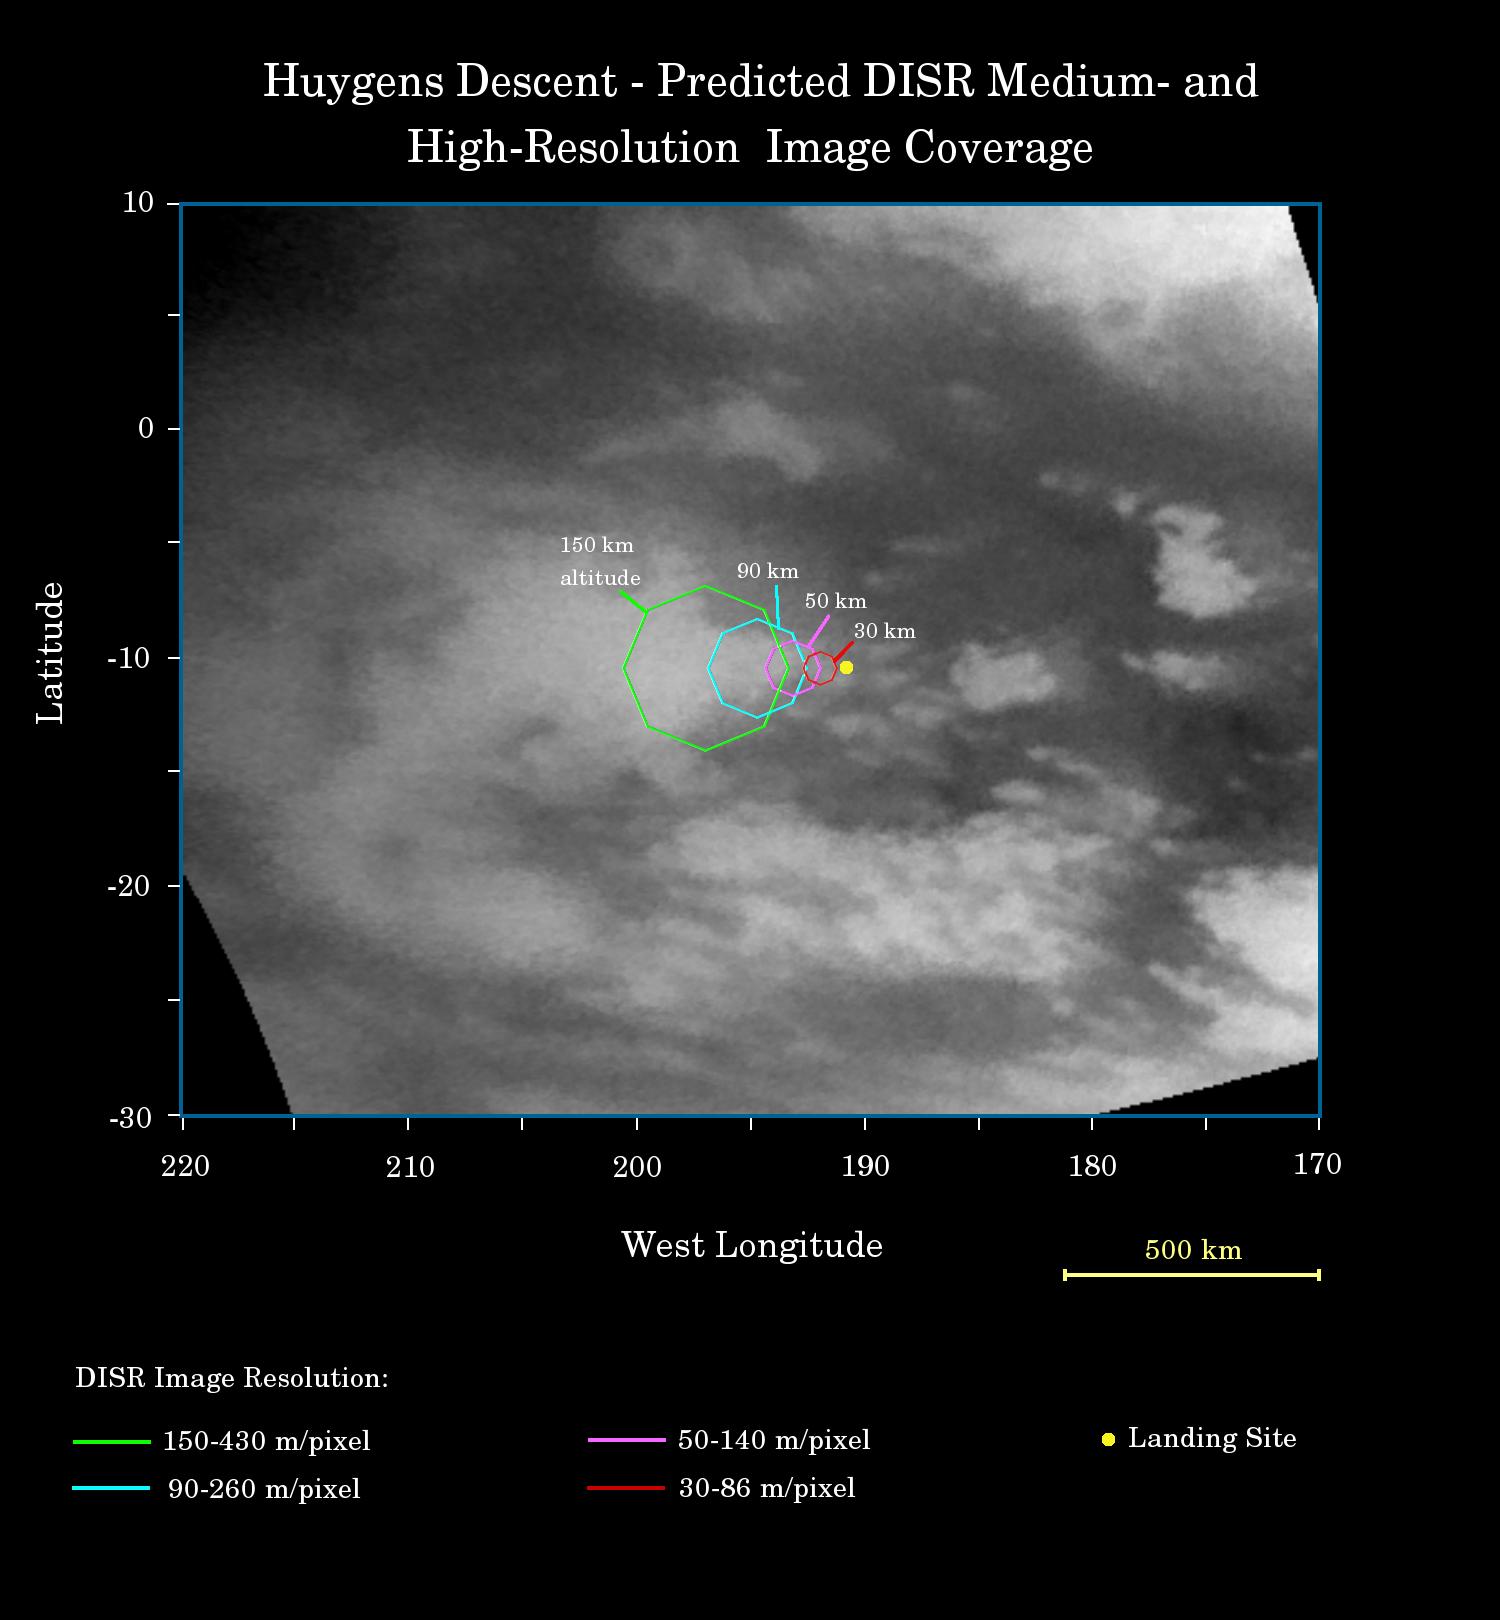 Black and white map with colored areas indicated planned Huygens probe imaging coverage.